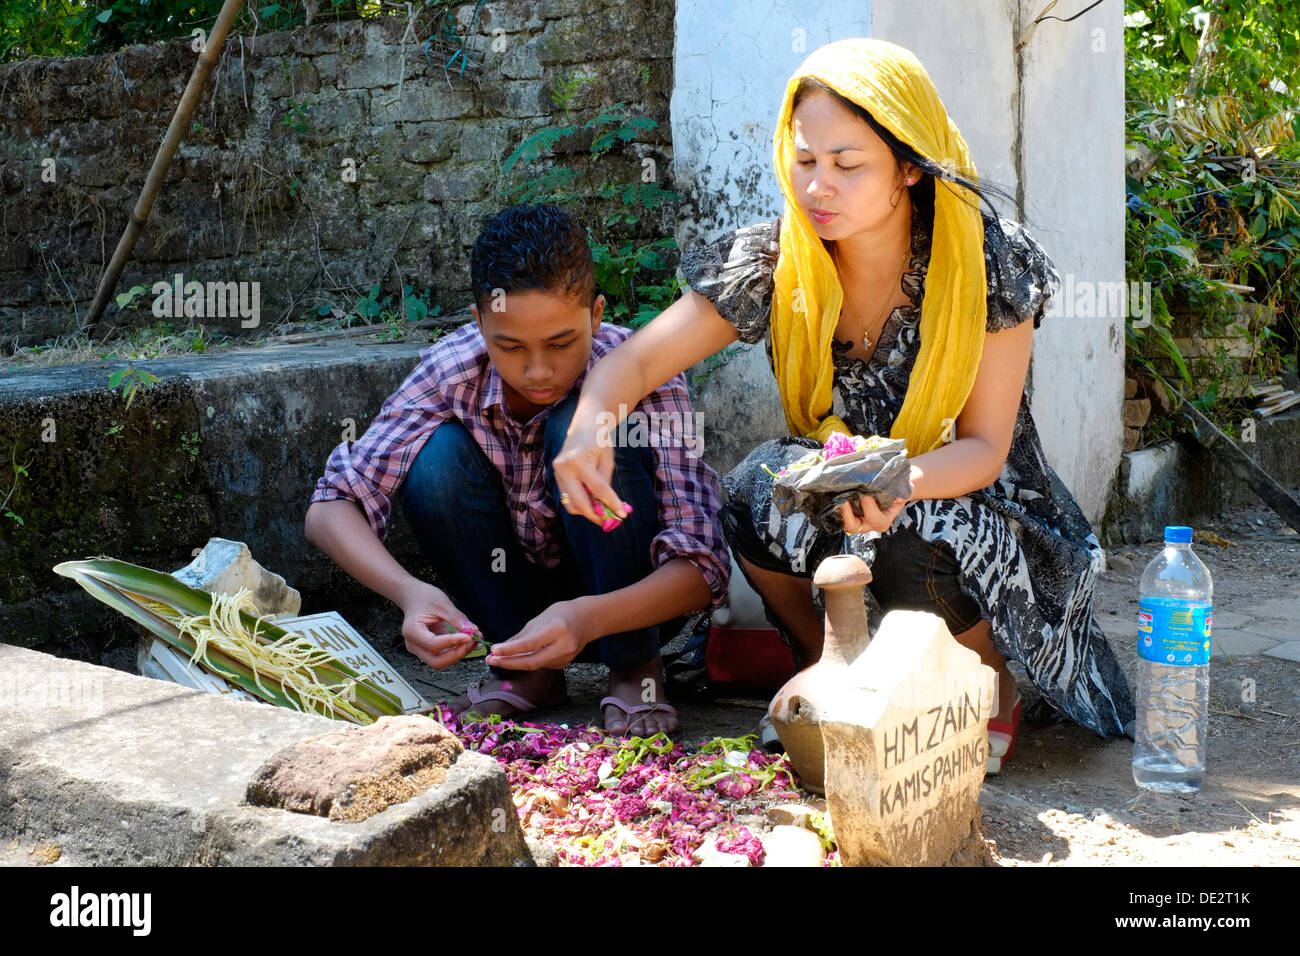 indonesian woman tends to pays her respects and prays at her fathers grave accompanied by her son Stock Photo